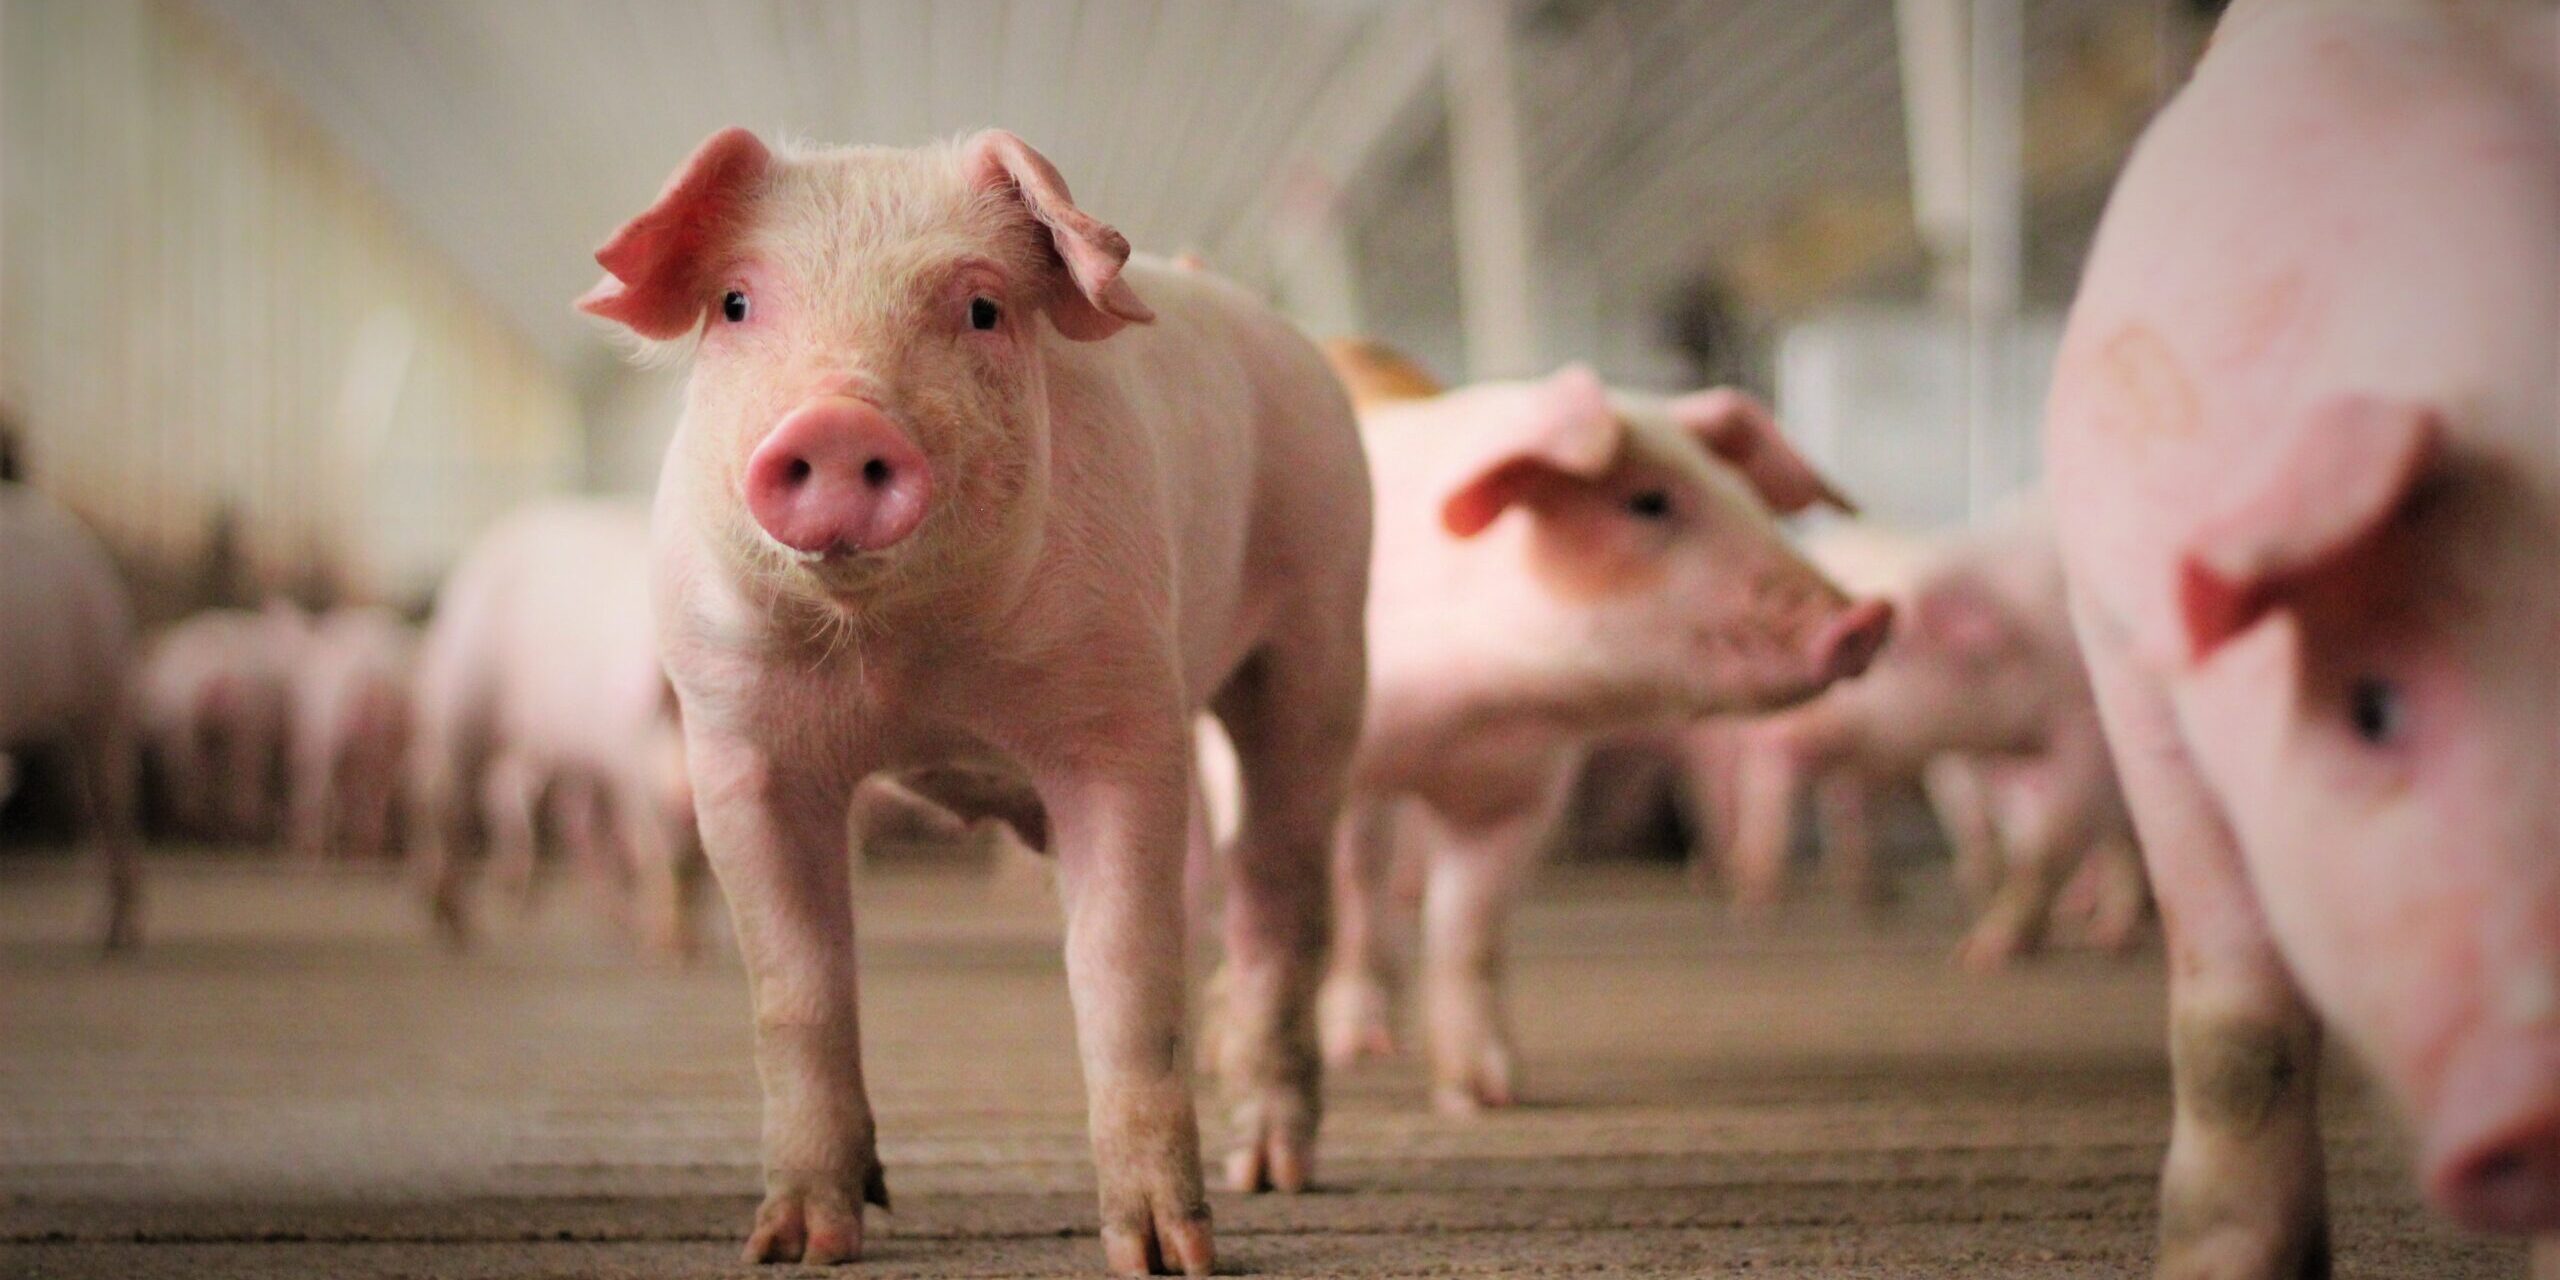 Setting the record straight on Iowa pork - Animal Agriculture Alliance